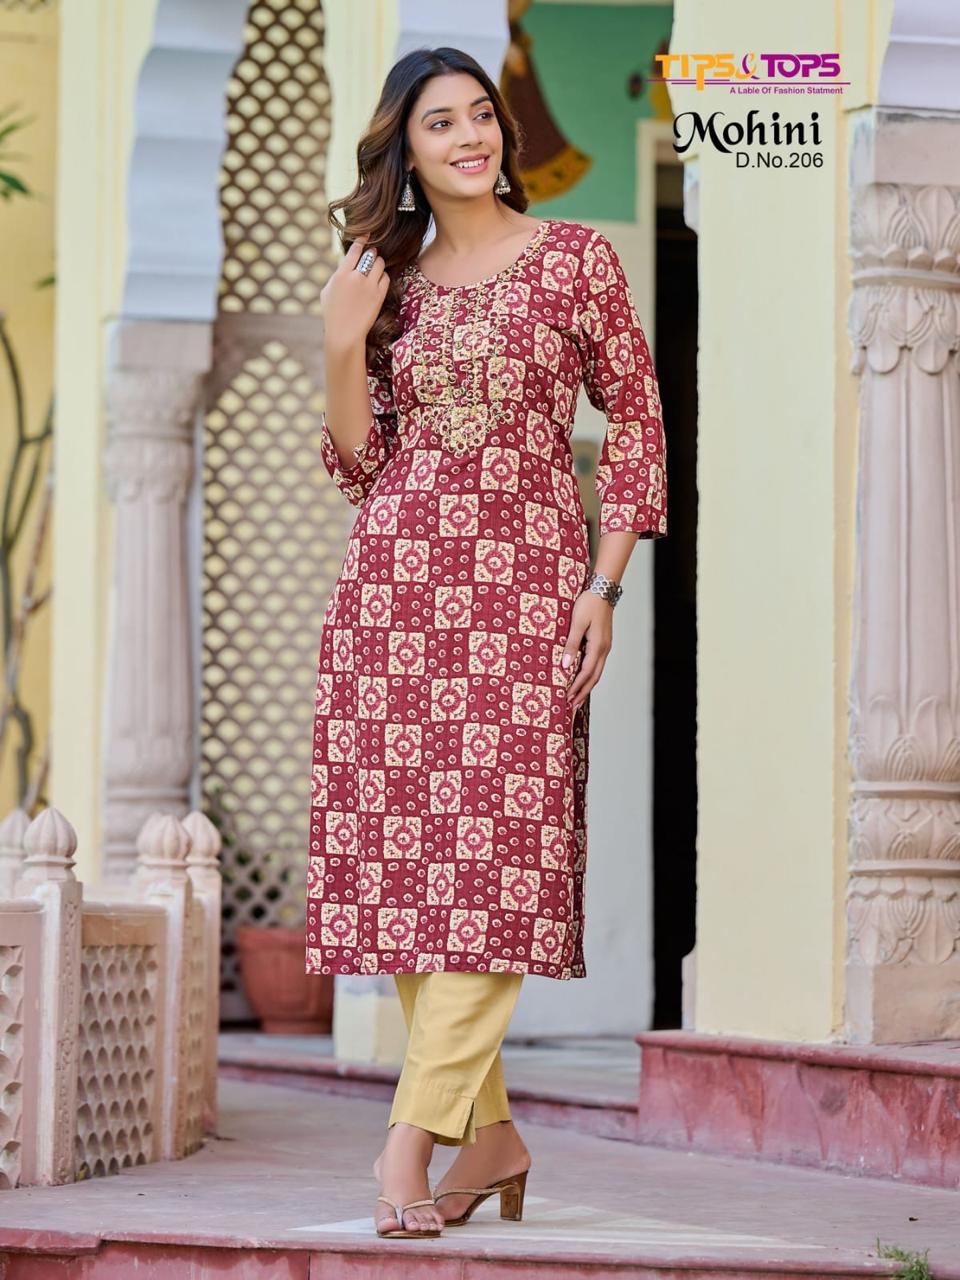 Tips And Tops Mohini Vol 2 collection 3